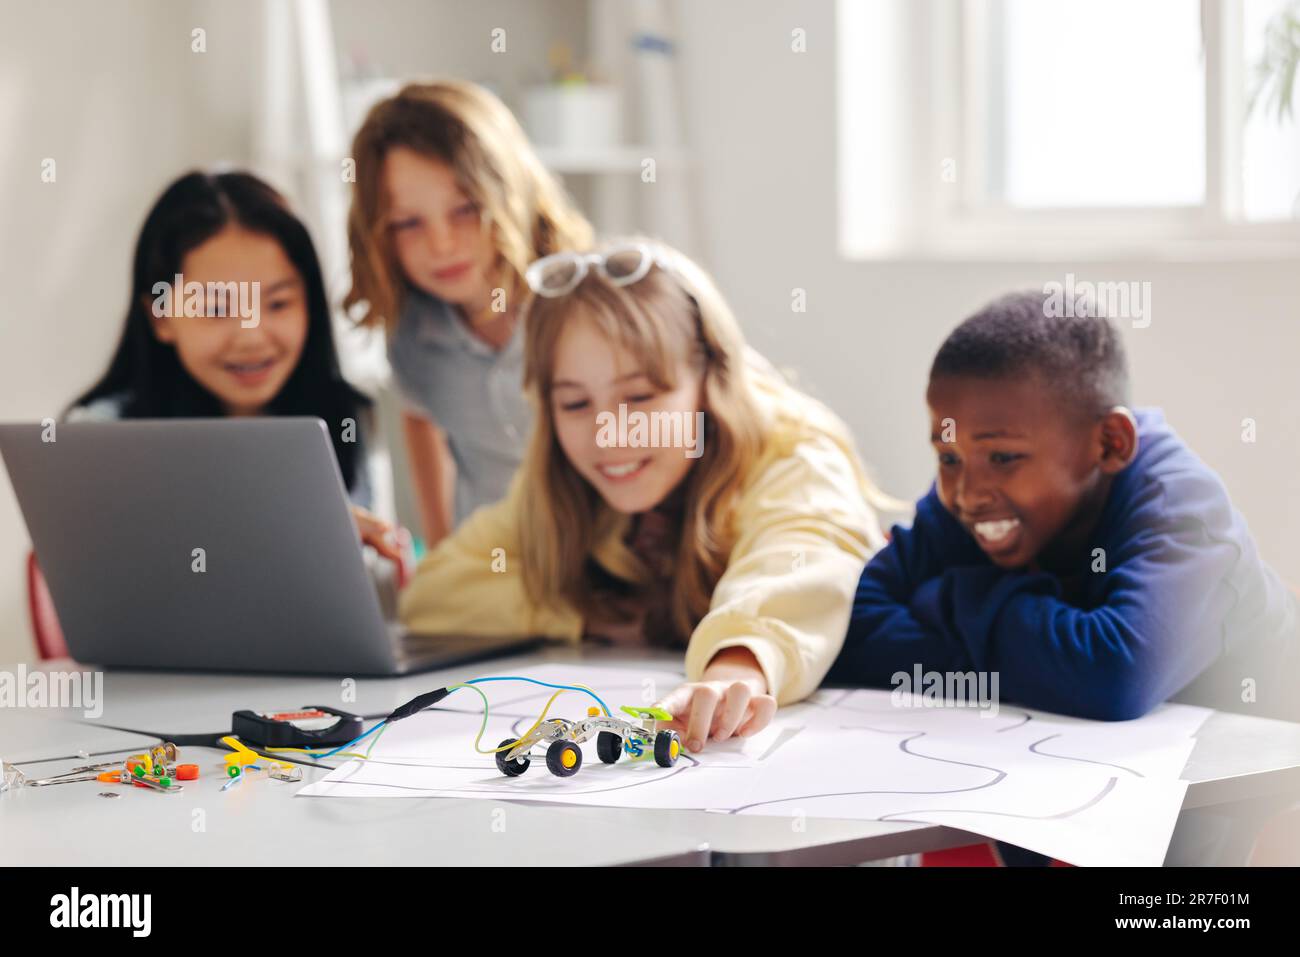 Hands-on robot programming lesson for children in a STEM classroom. Kids use education software on a laptop to program and operate robotic cars, explo Stock Photo